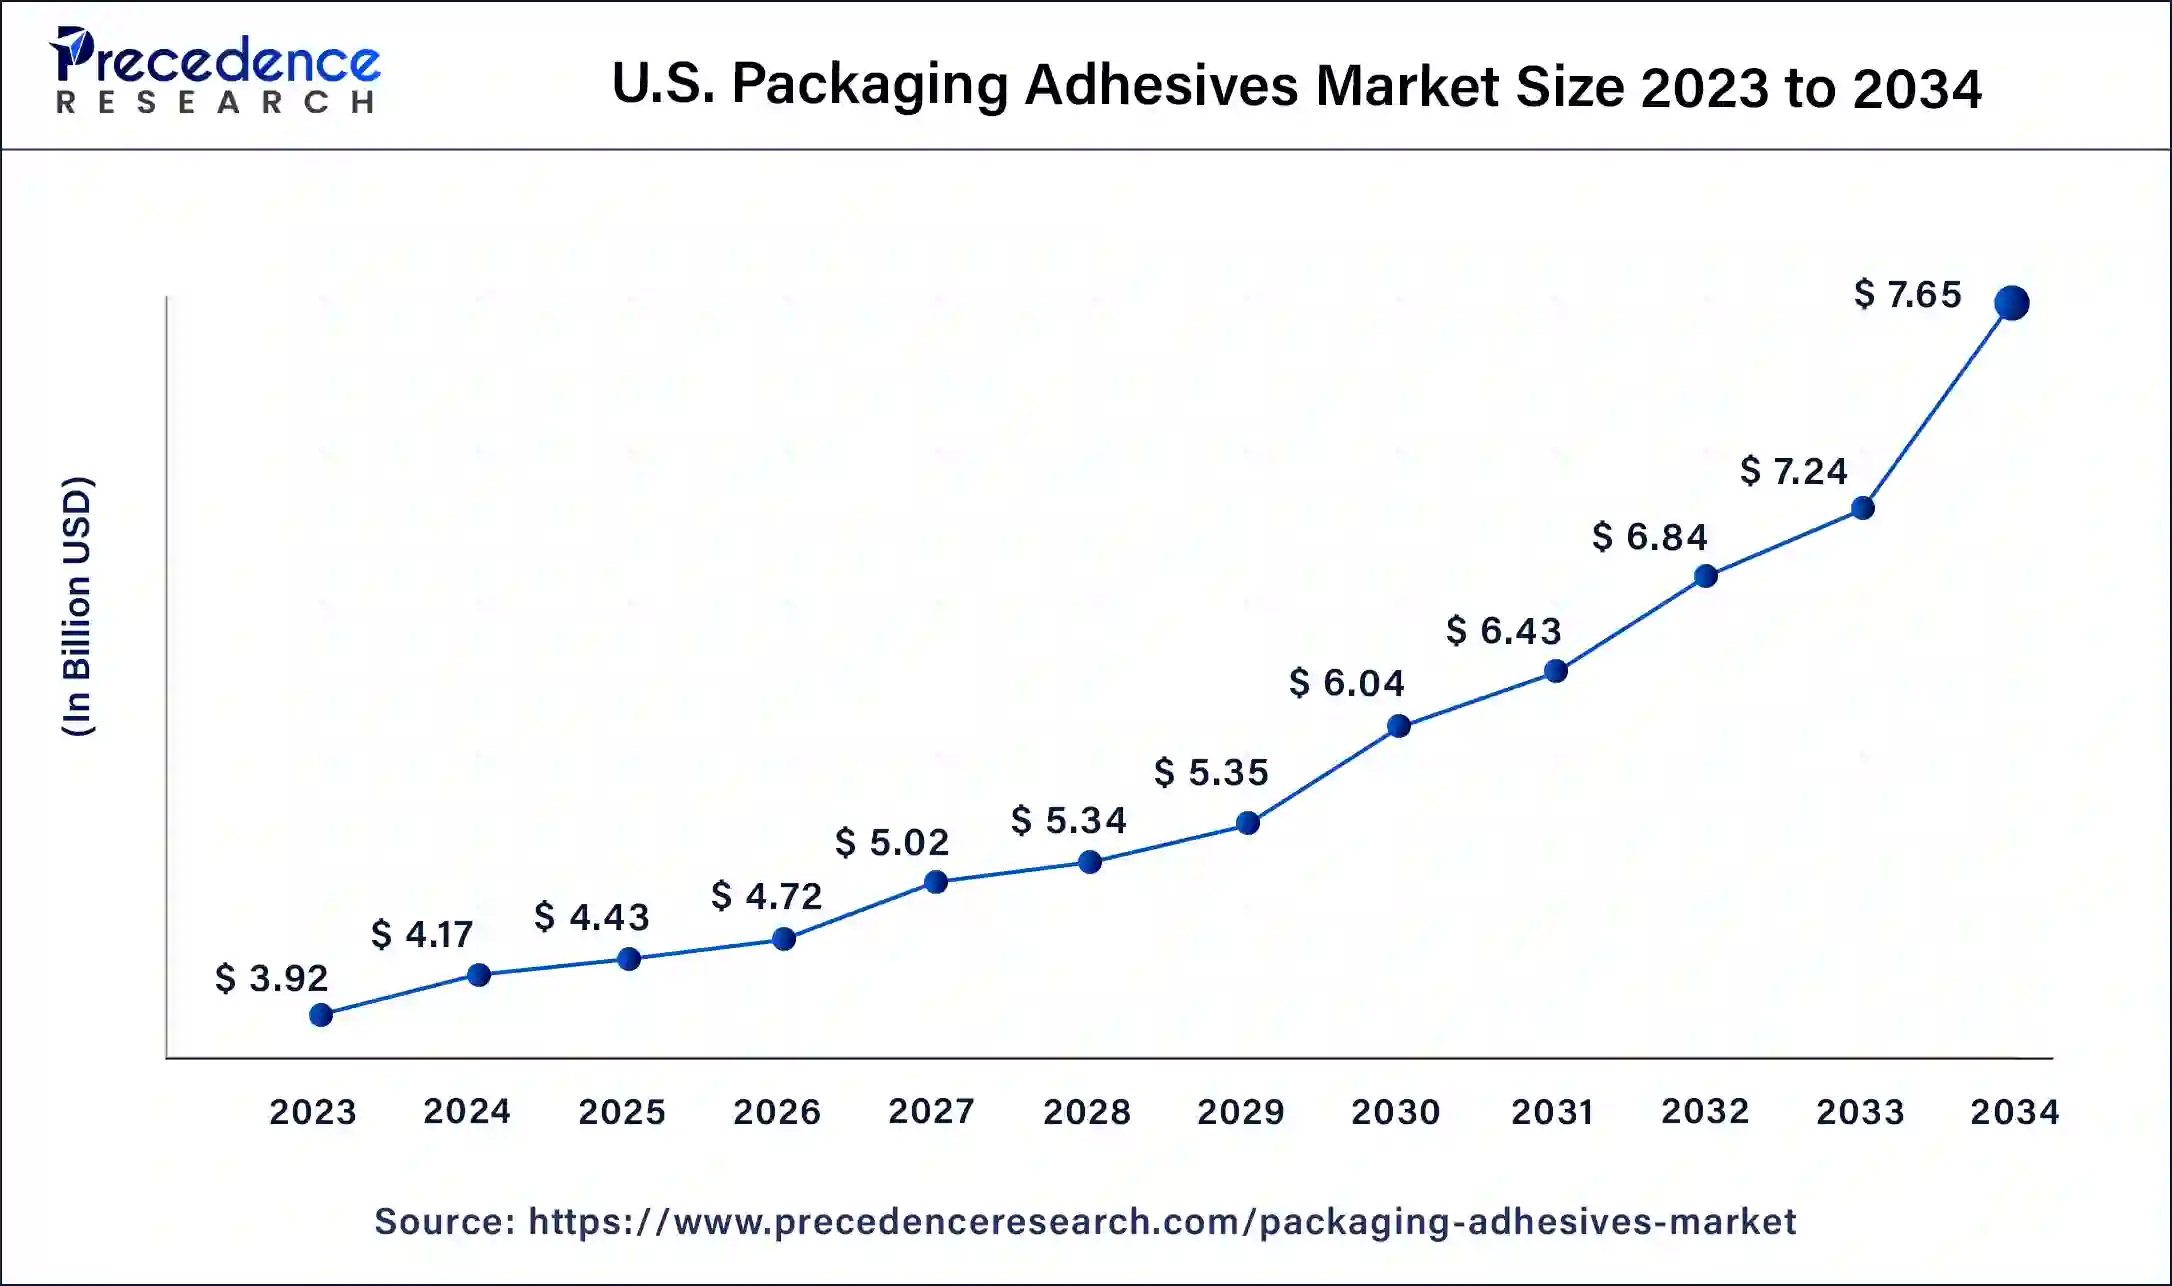 U.S. Packaging Adhesives Market Size 2024 To 2034